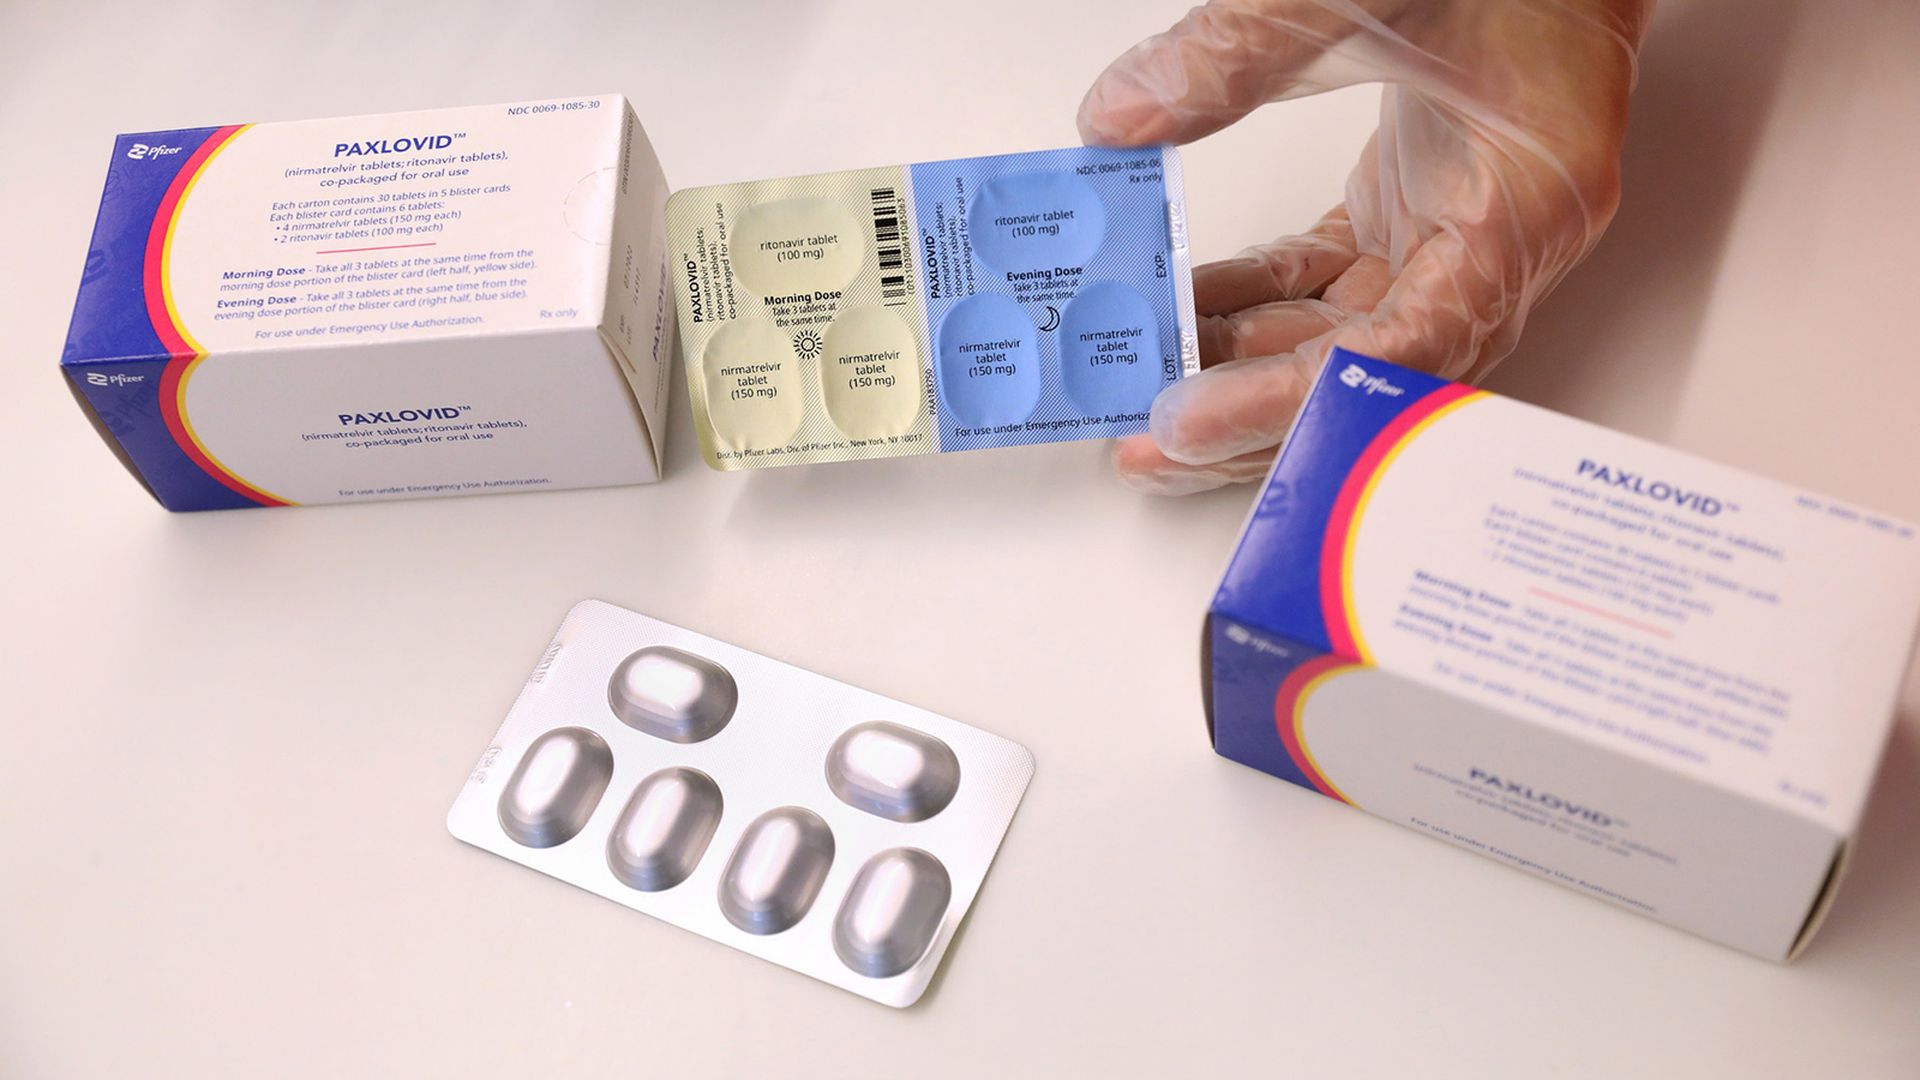 A hand wearing a medical glove handles boxes of Paxlovid.